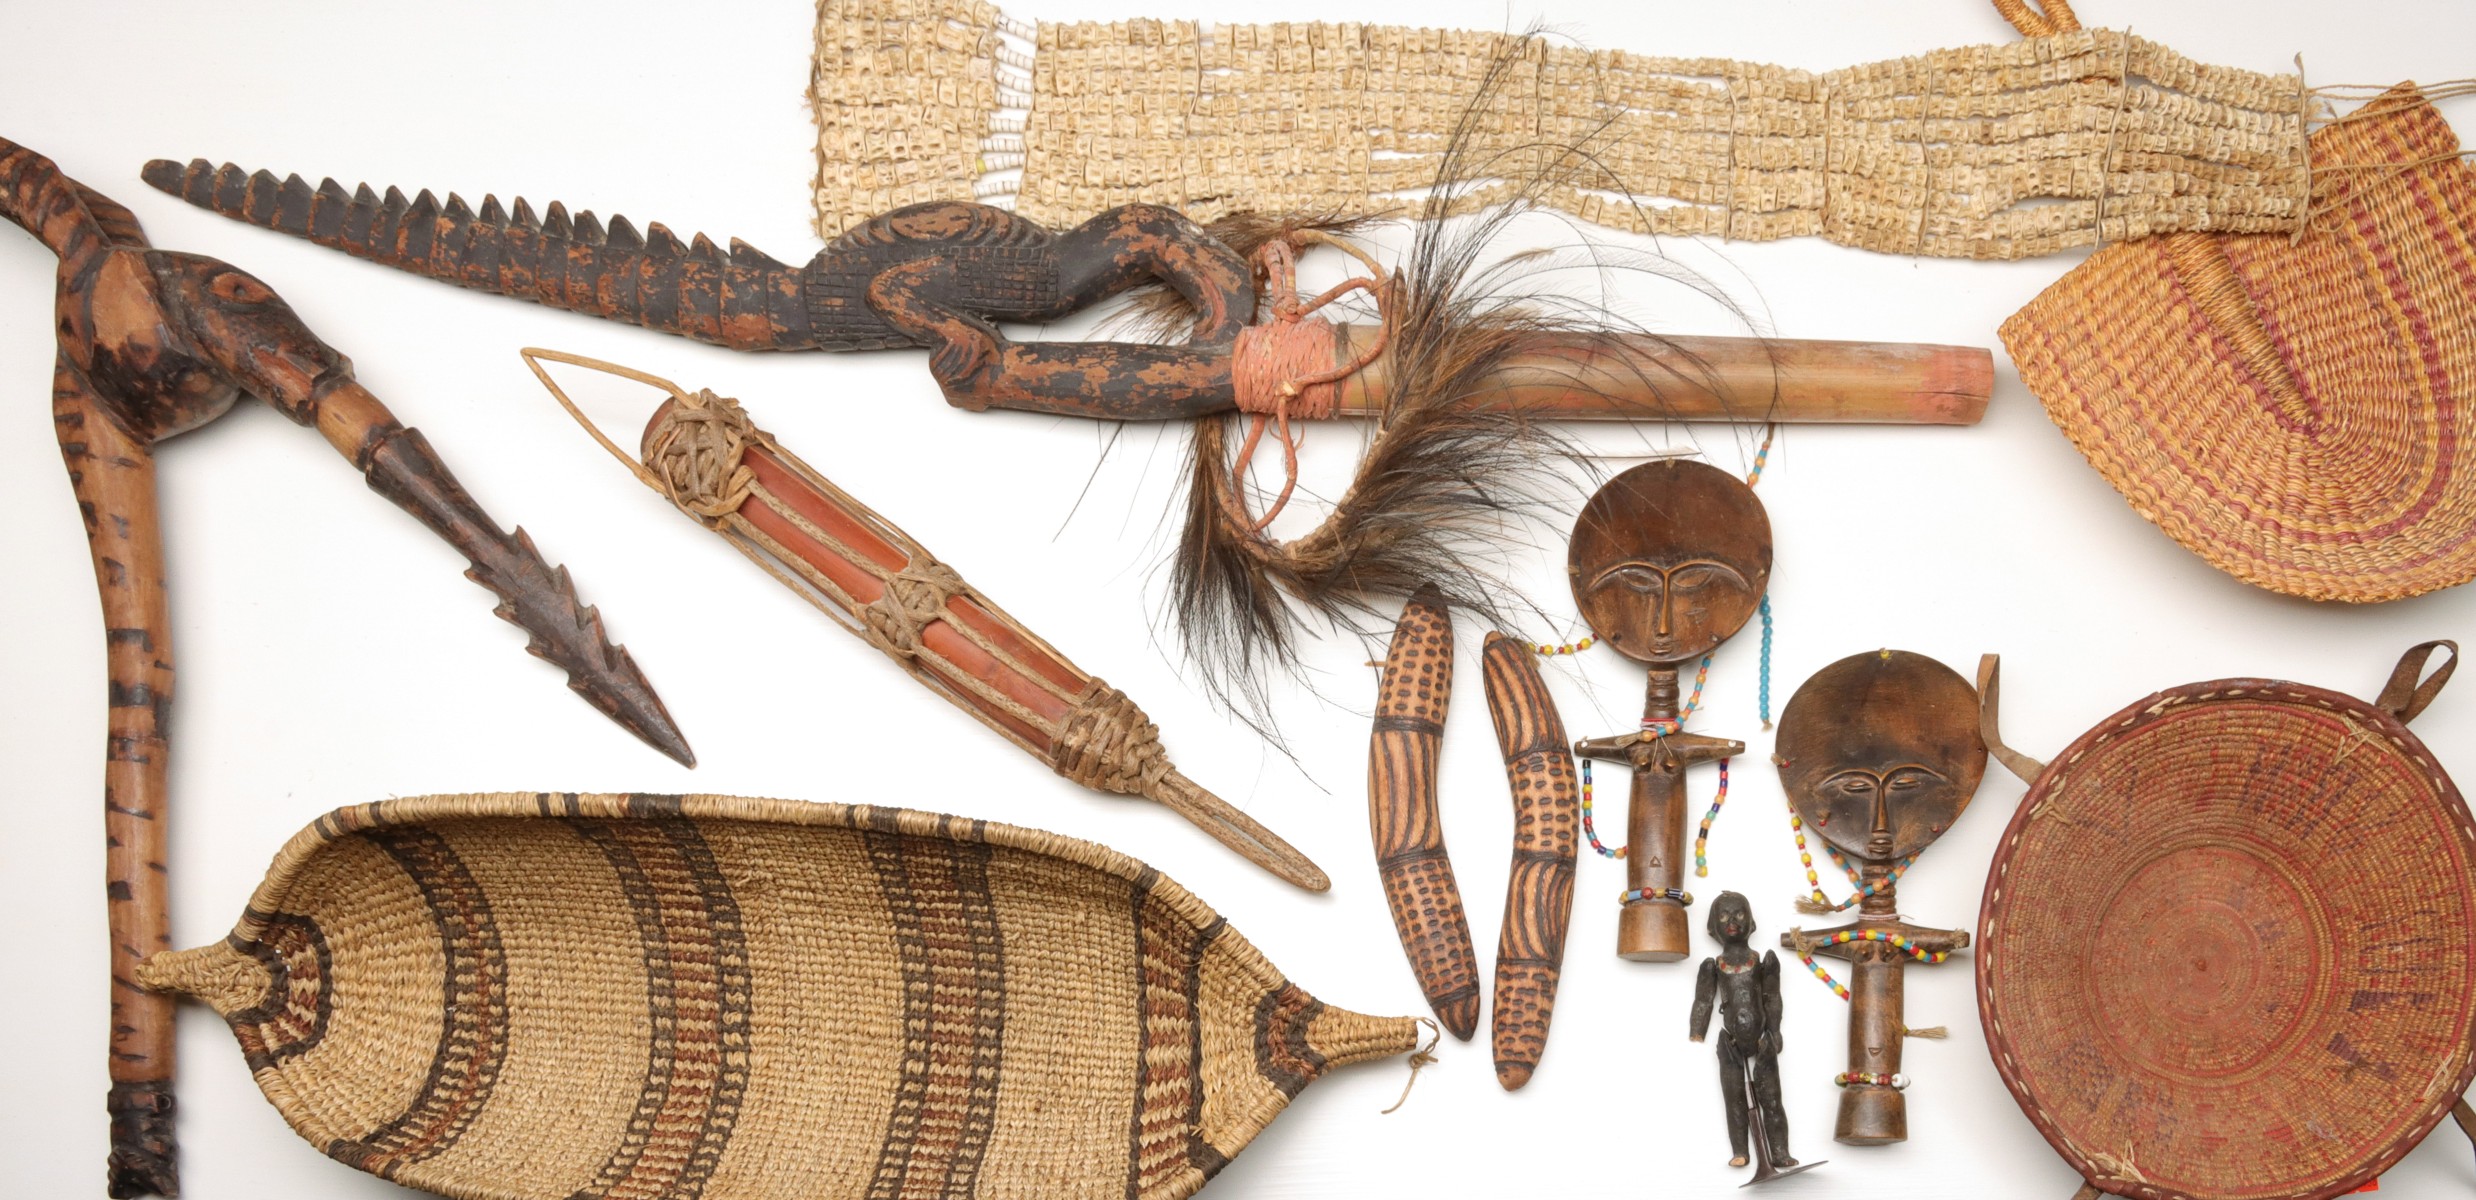 A COLLECTION OF AFRICAN AND OCEANA OBJECTS